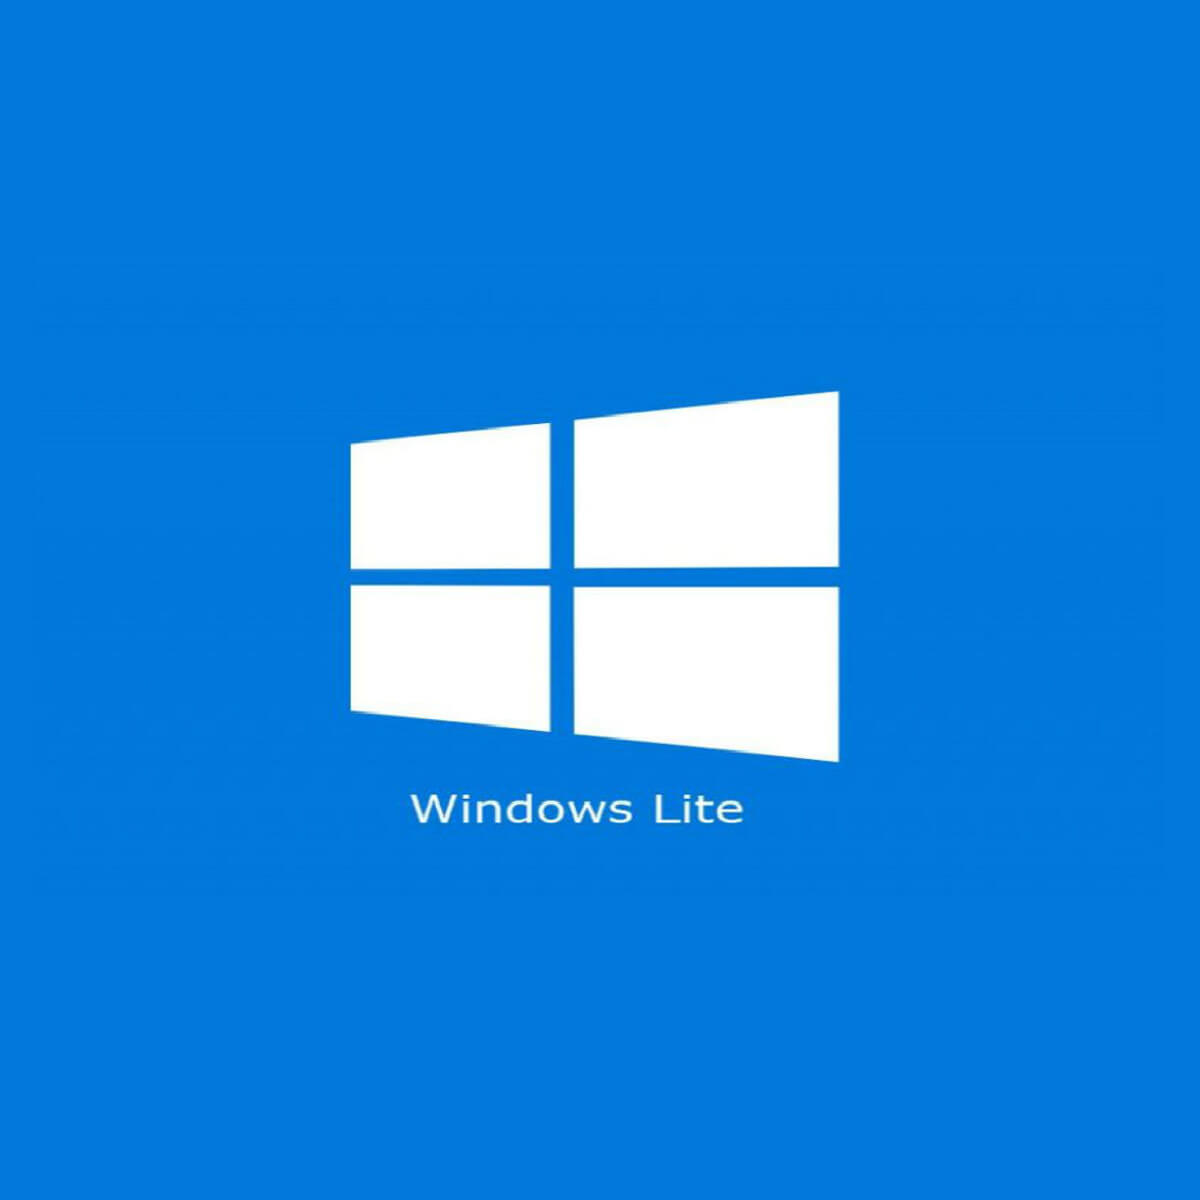 Windows Lite OS support Win32 apps